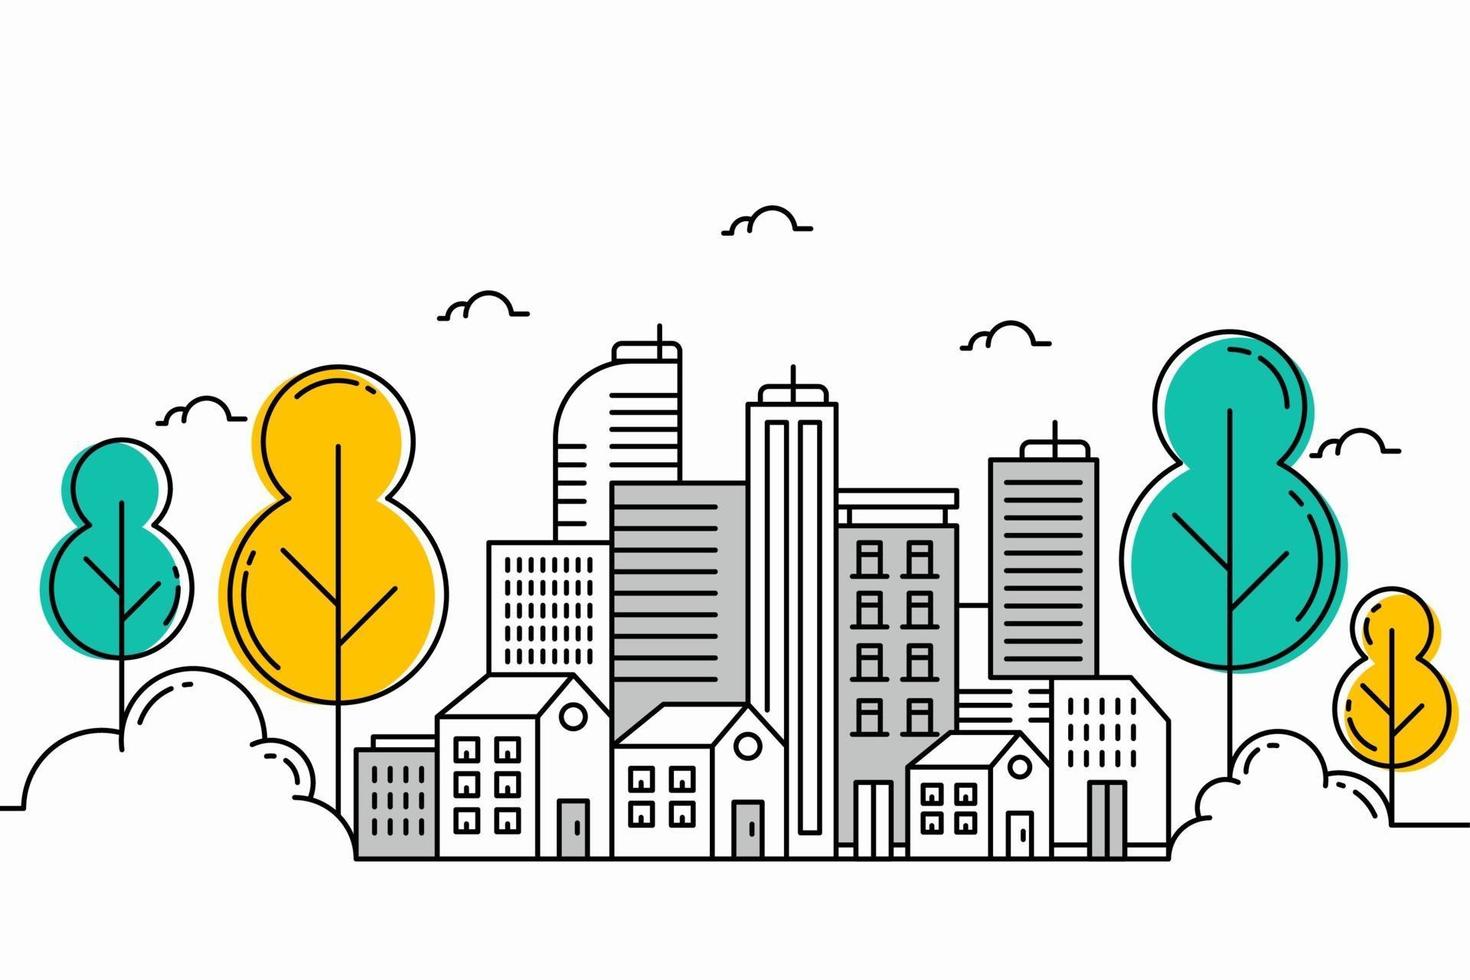 City illustration with thin line style vector